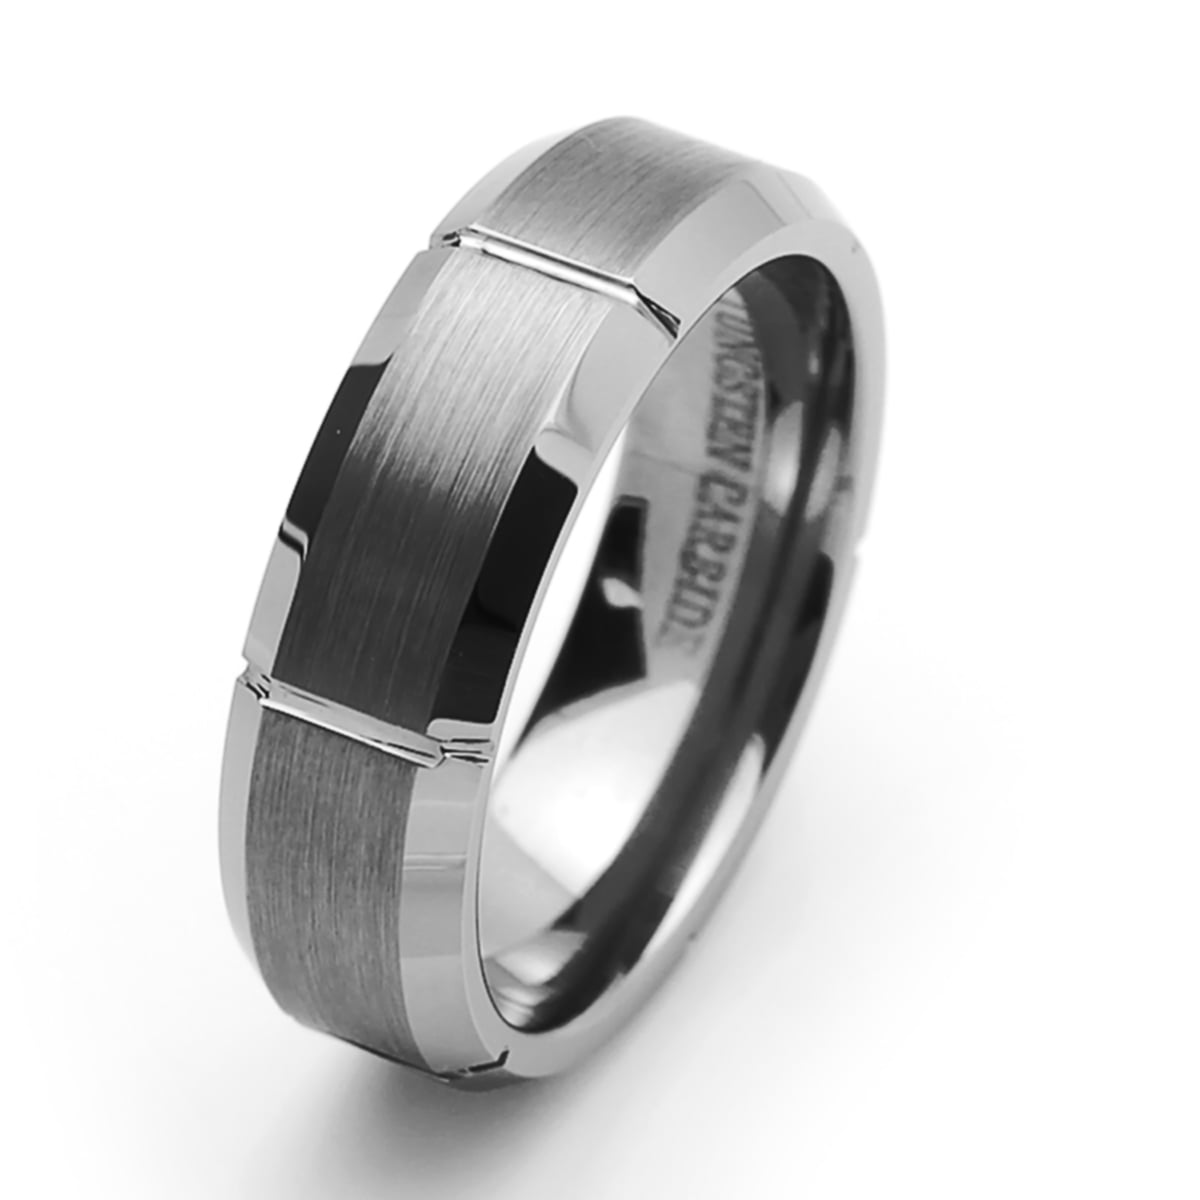 Wedding Band Ring Set For Him & Her 9MM/7MM Tungsten Carbide Beveled Edge Brushed Center With Shiny Groove 